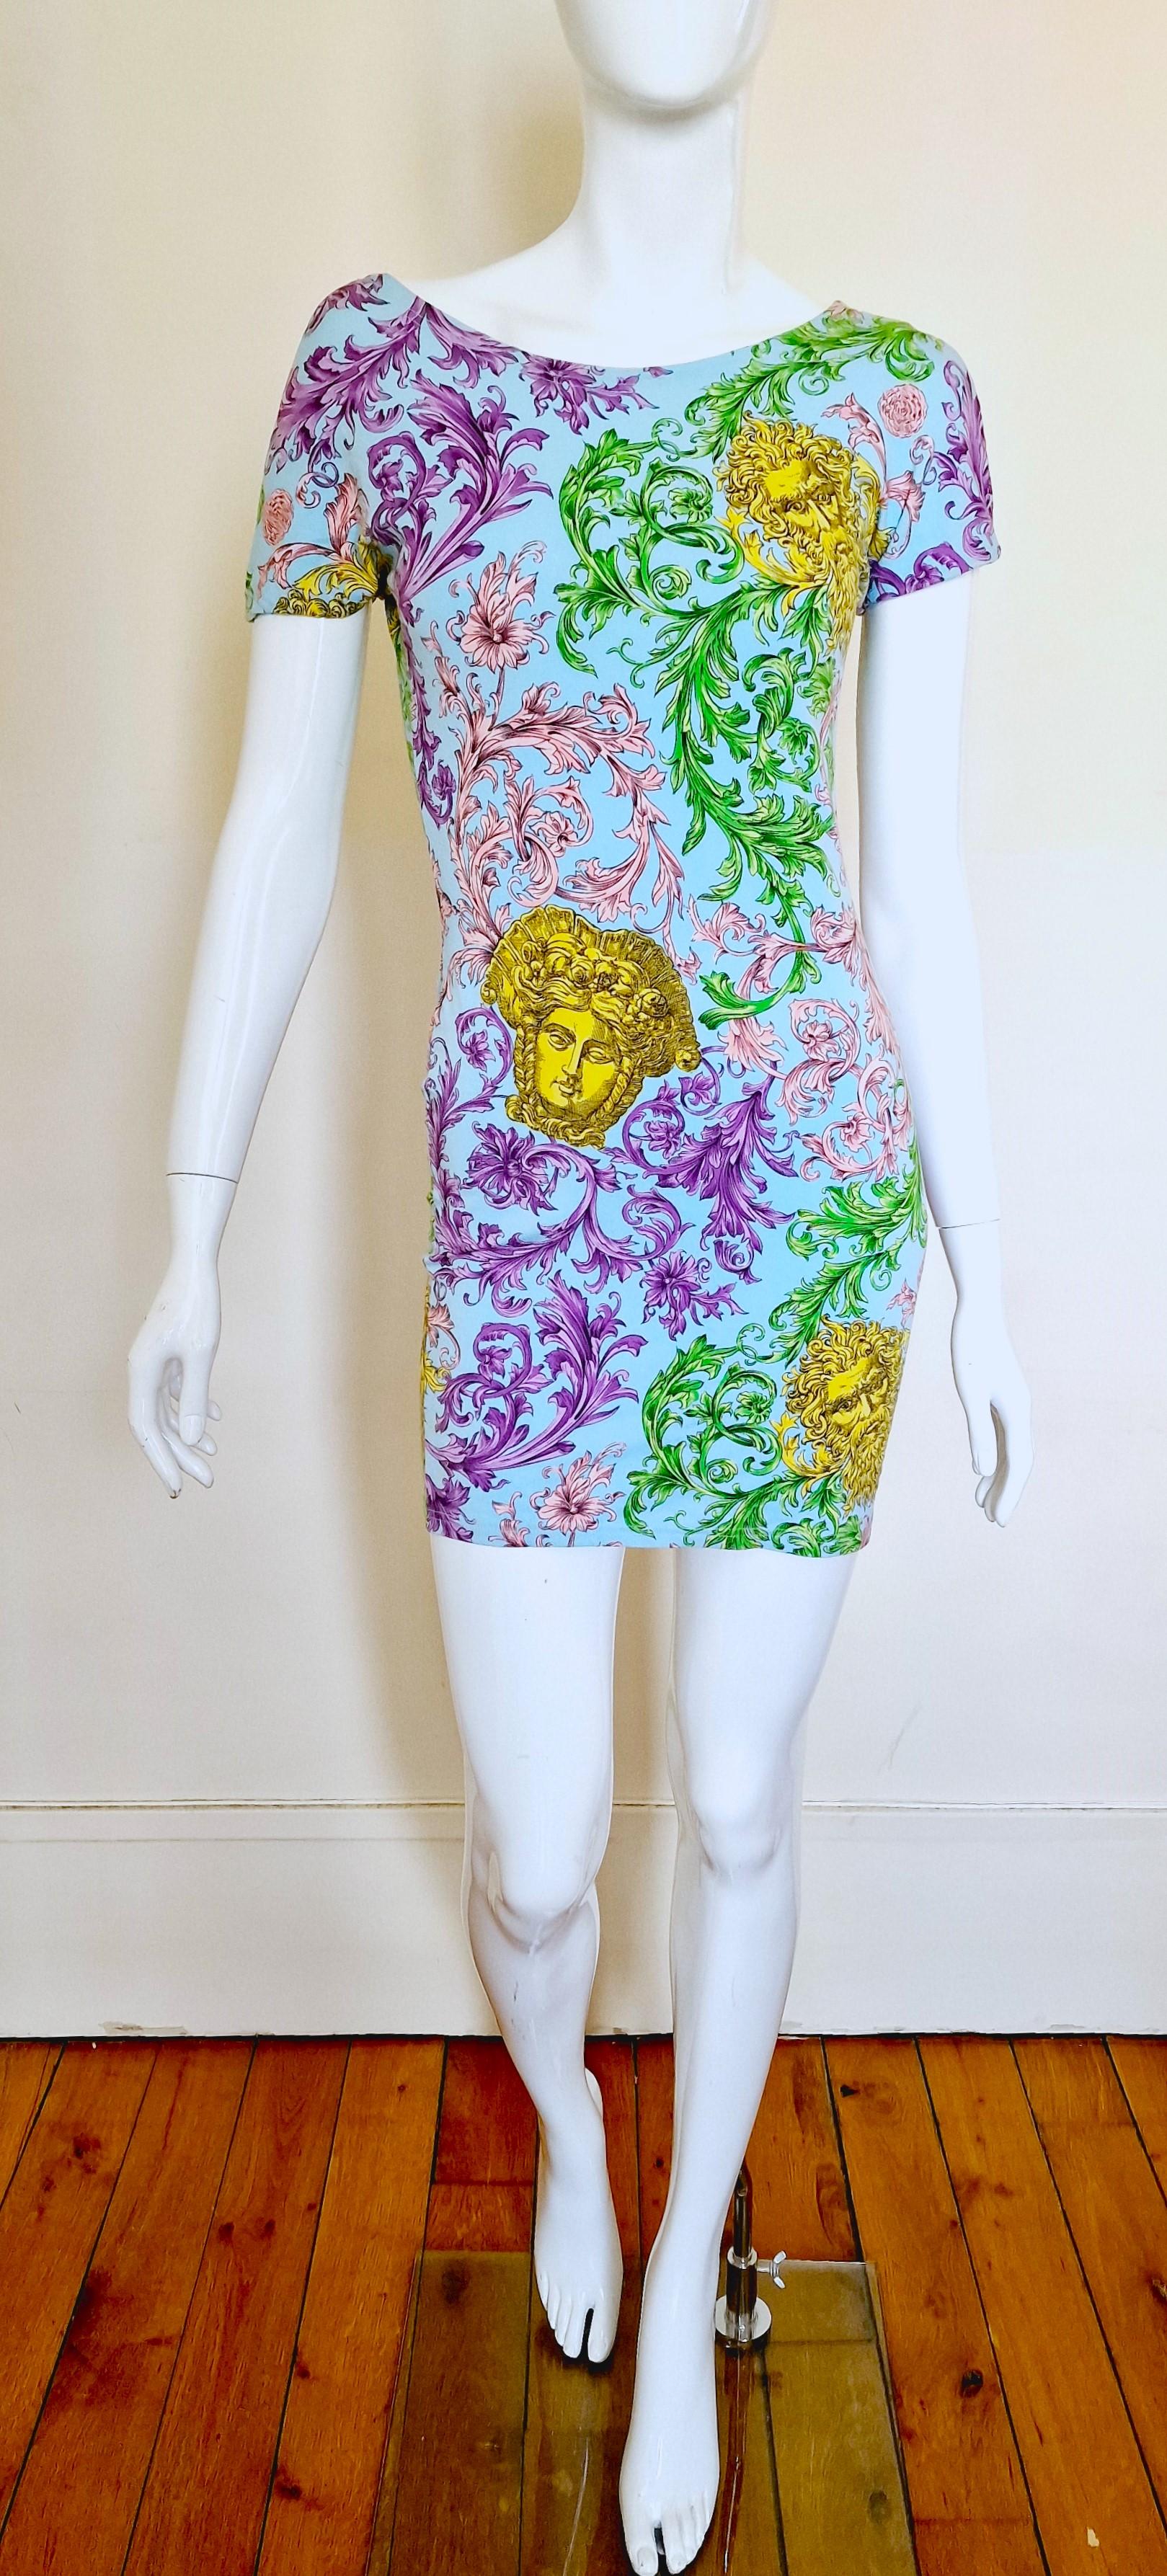 Iconic Medusa head and baroque print dress by Gianni Versace.
Deep back cut.
Bodycon shape.

LIKE NEW!

SIZE
Fits from medium to large.
Marked size: Italian 32/46.
Length: 75 cm / 29.5 inch
Bust: 39 cm / 15.3 inch
Waist: 35 cm / 13.8 inch
Hips: 40